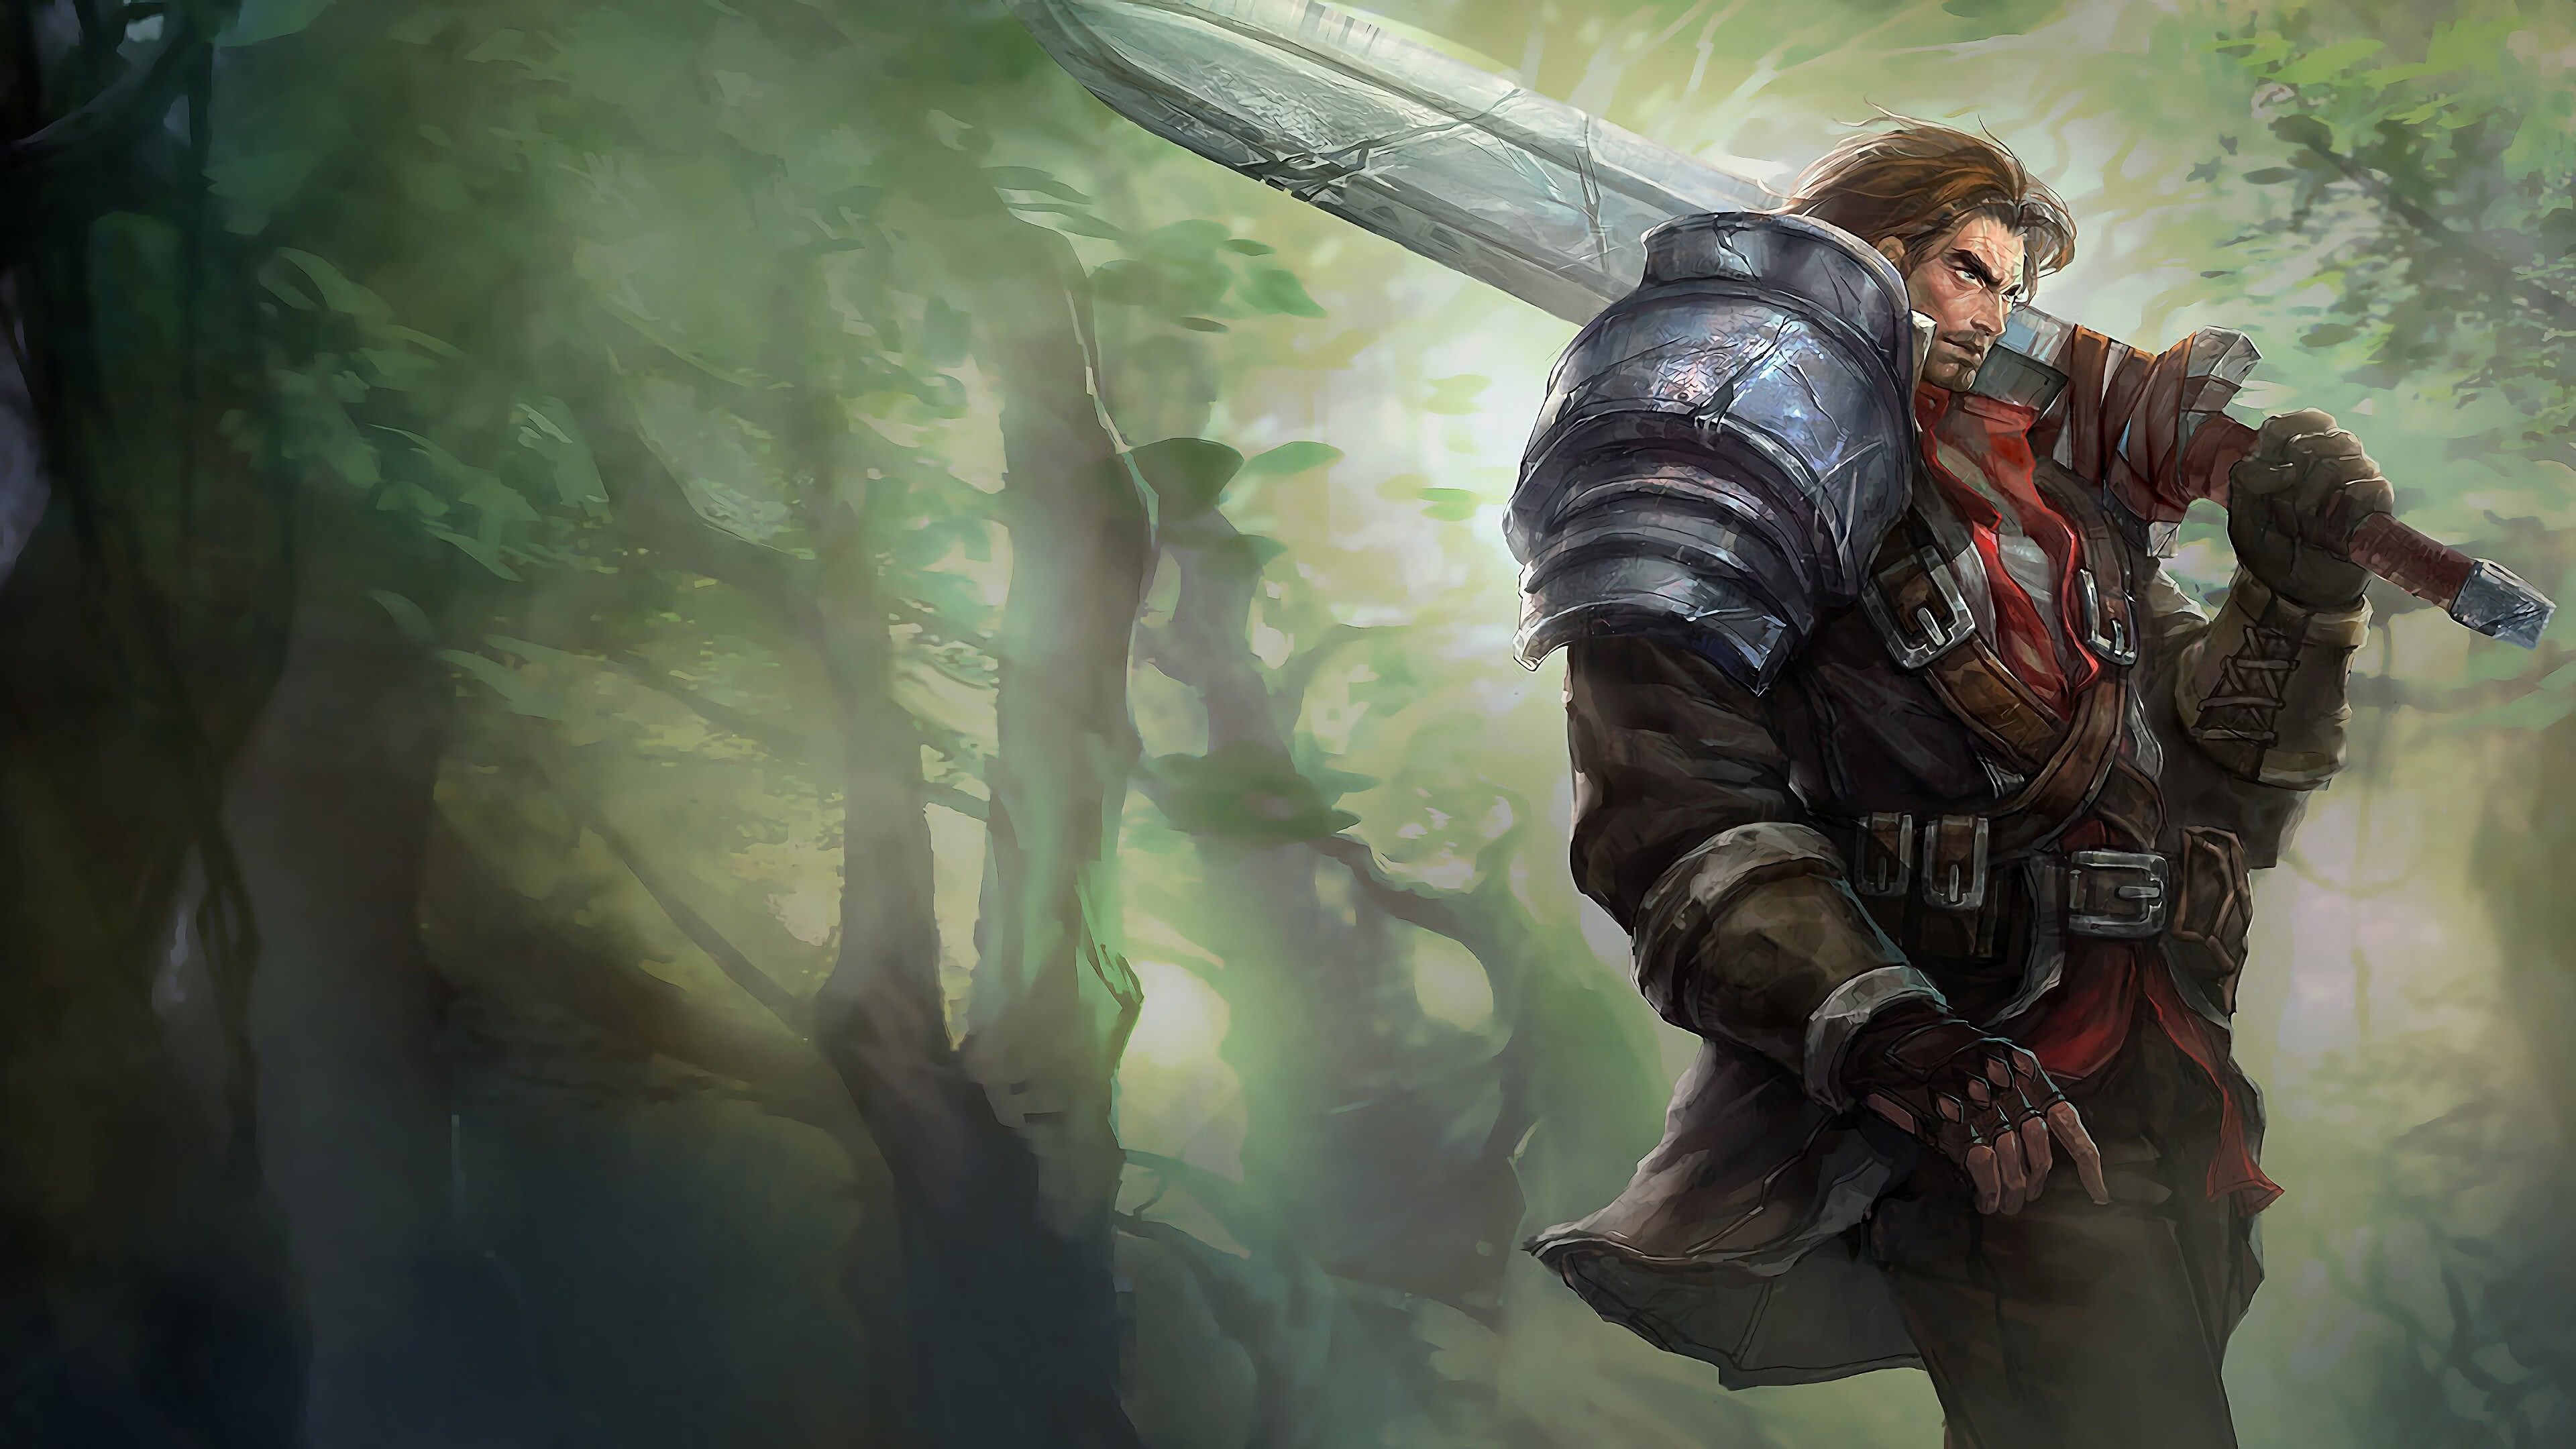 Garen: Fan art of a proud and noble soldier, The head of the Dauntless Vanguard, LoL. 3840x2160 4K Background.